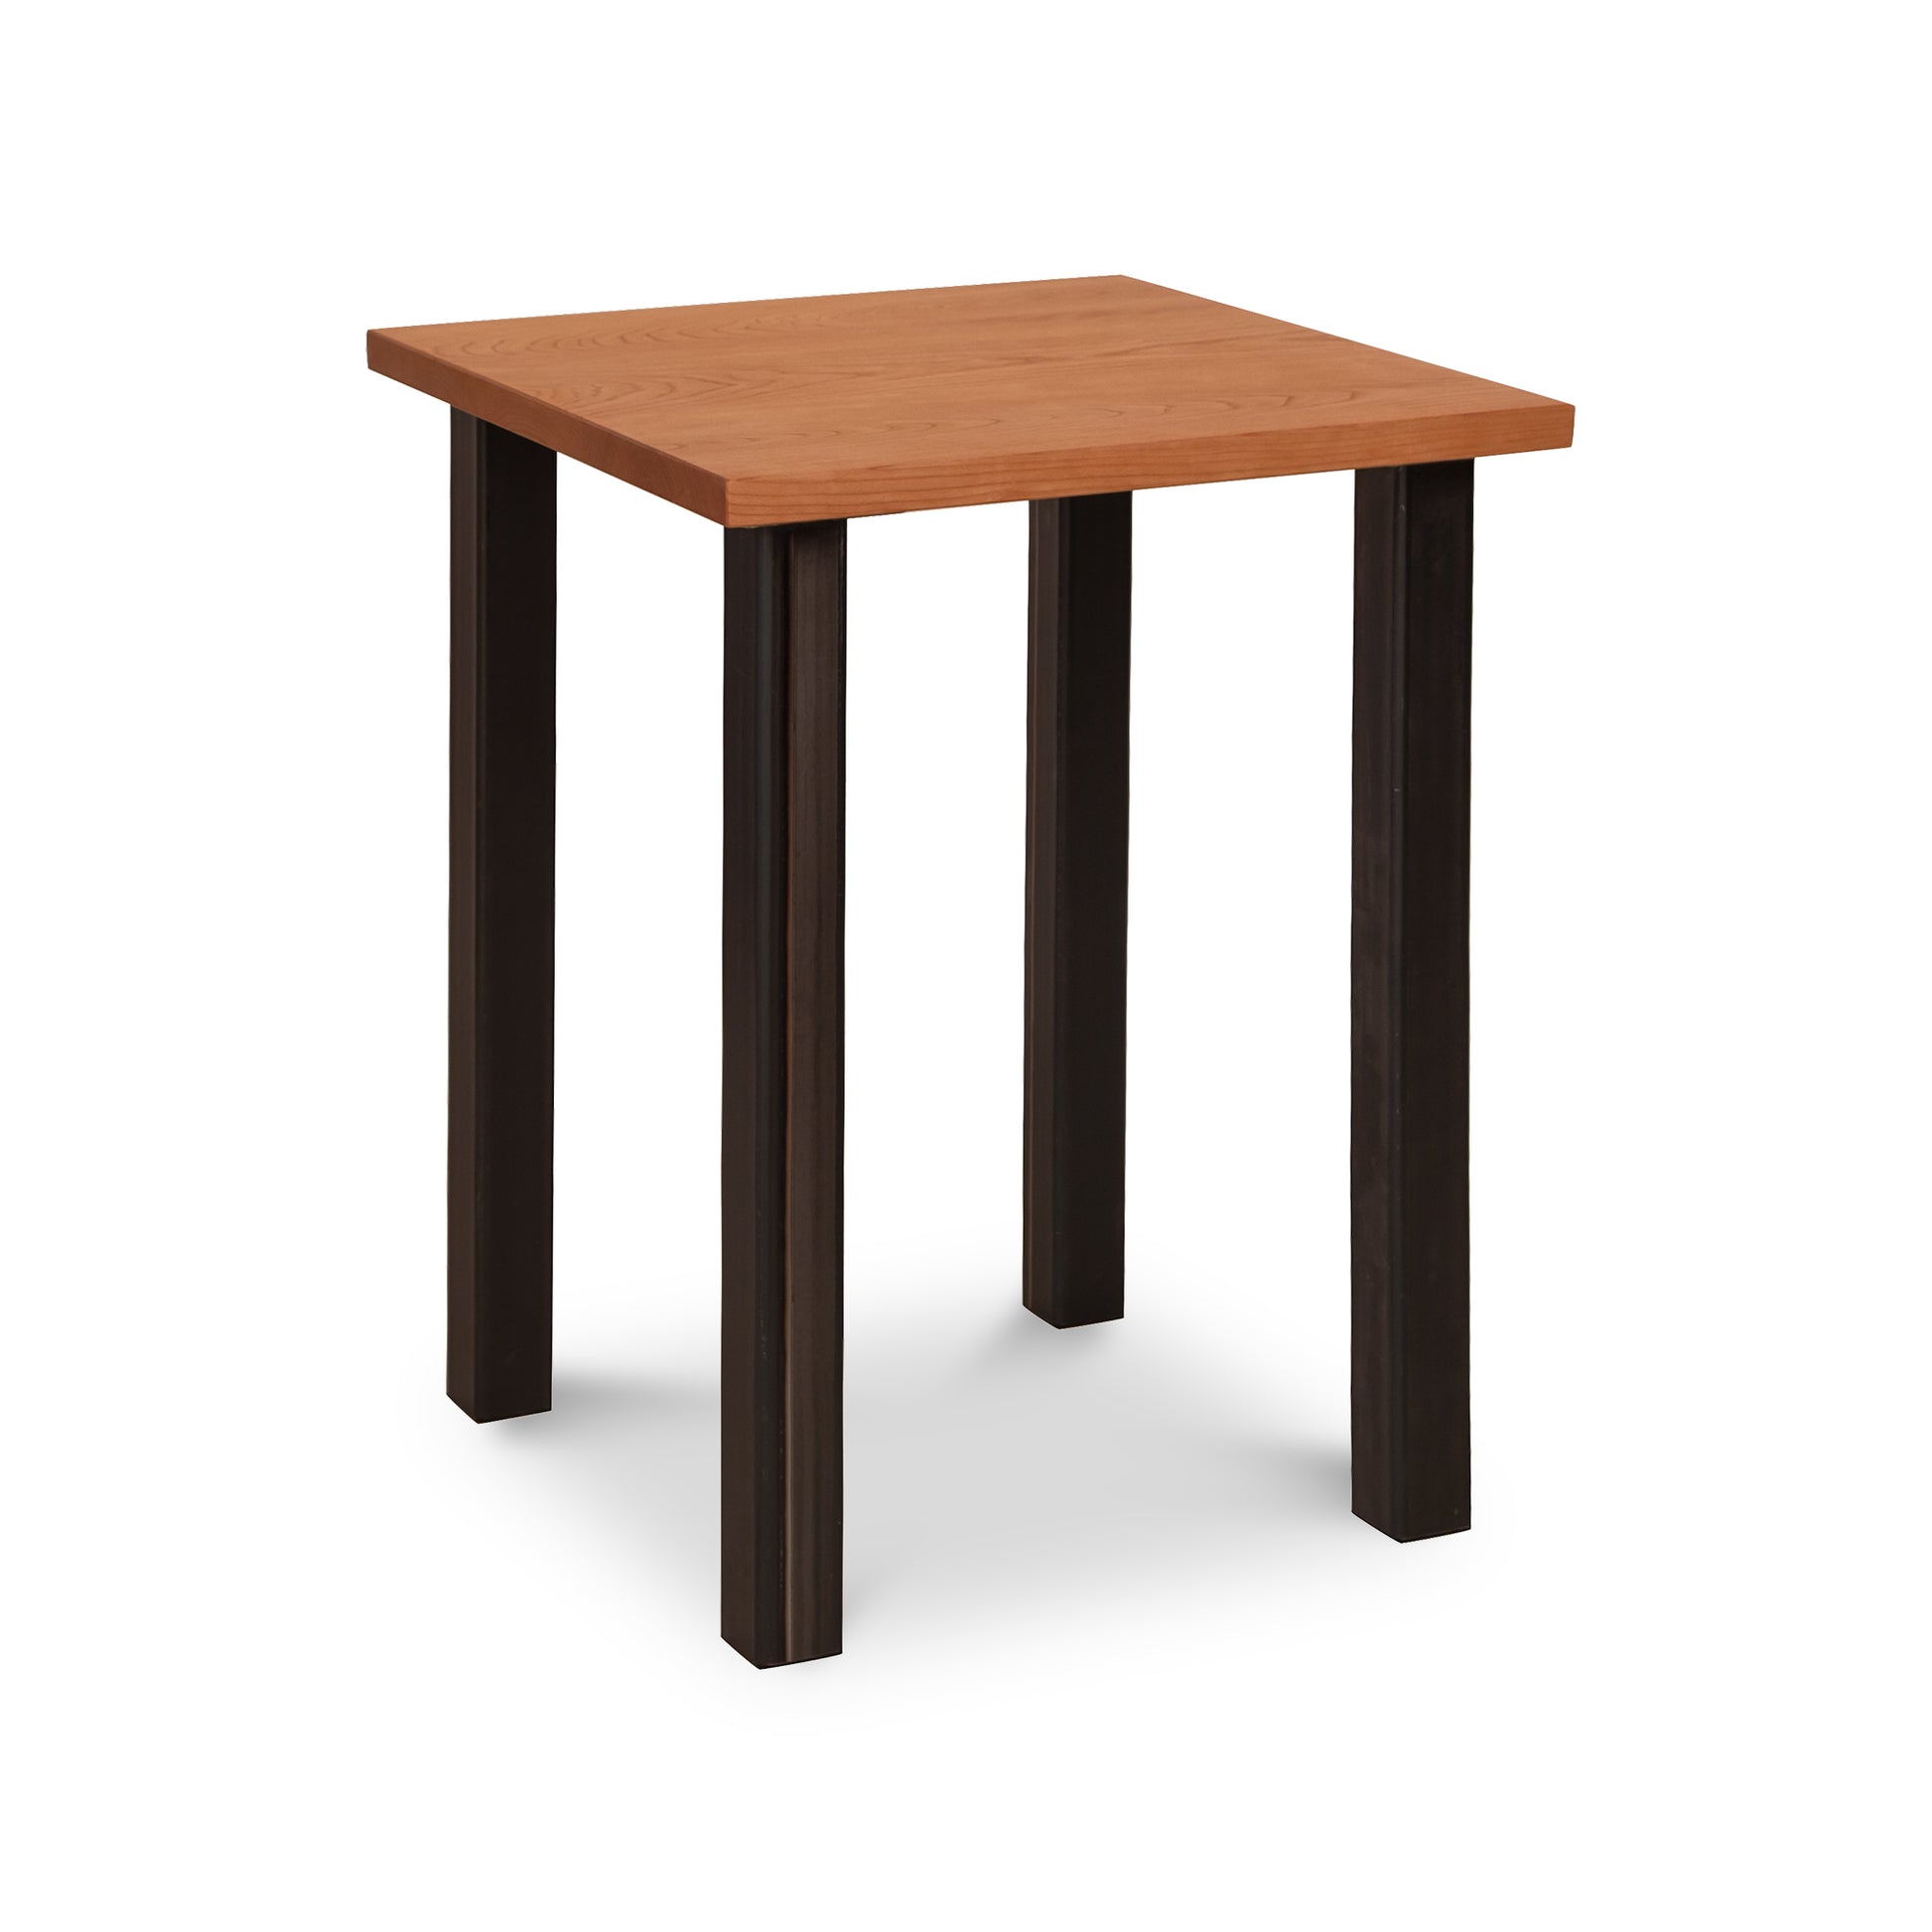 A square table with black legs on a white background.